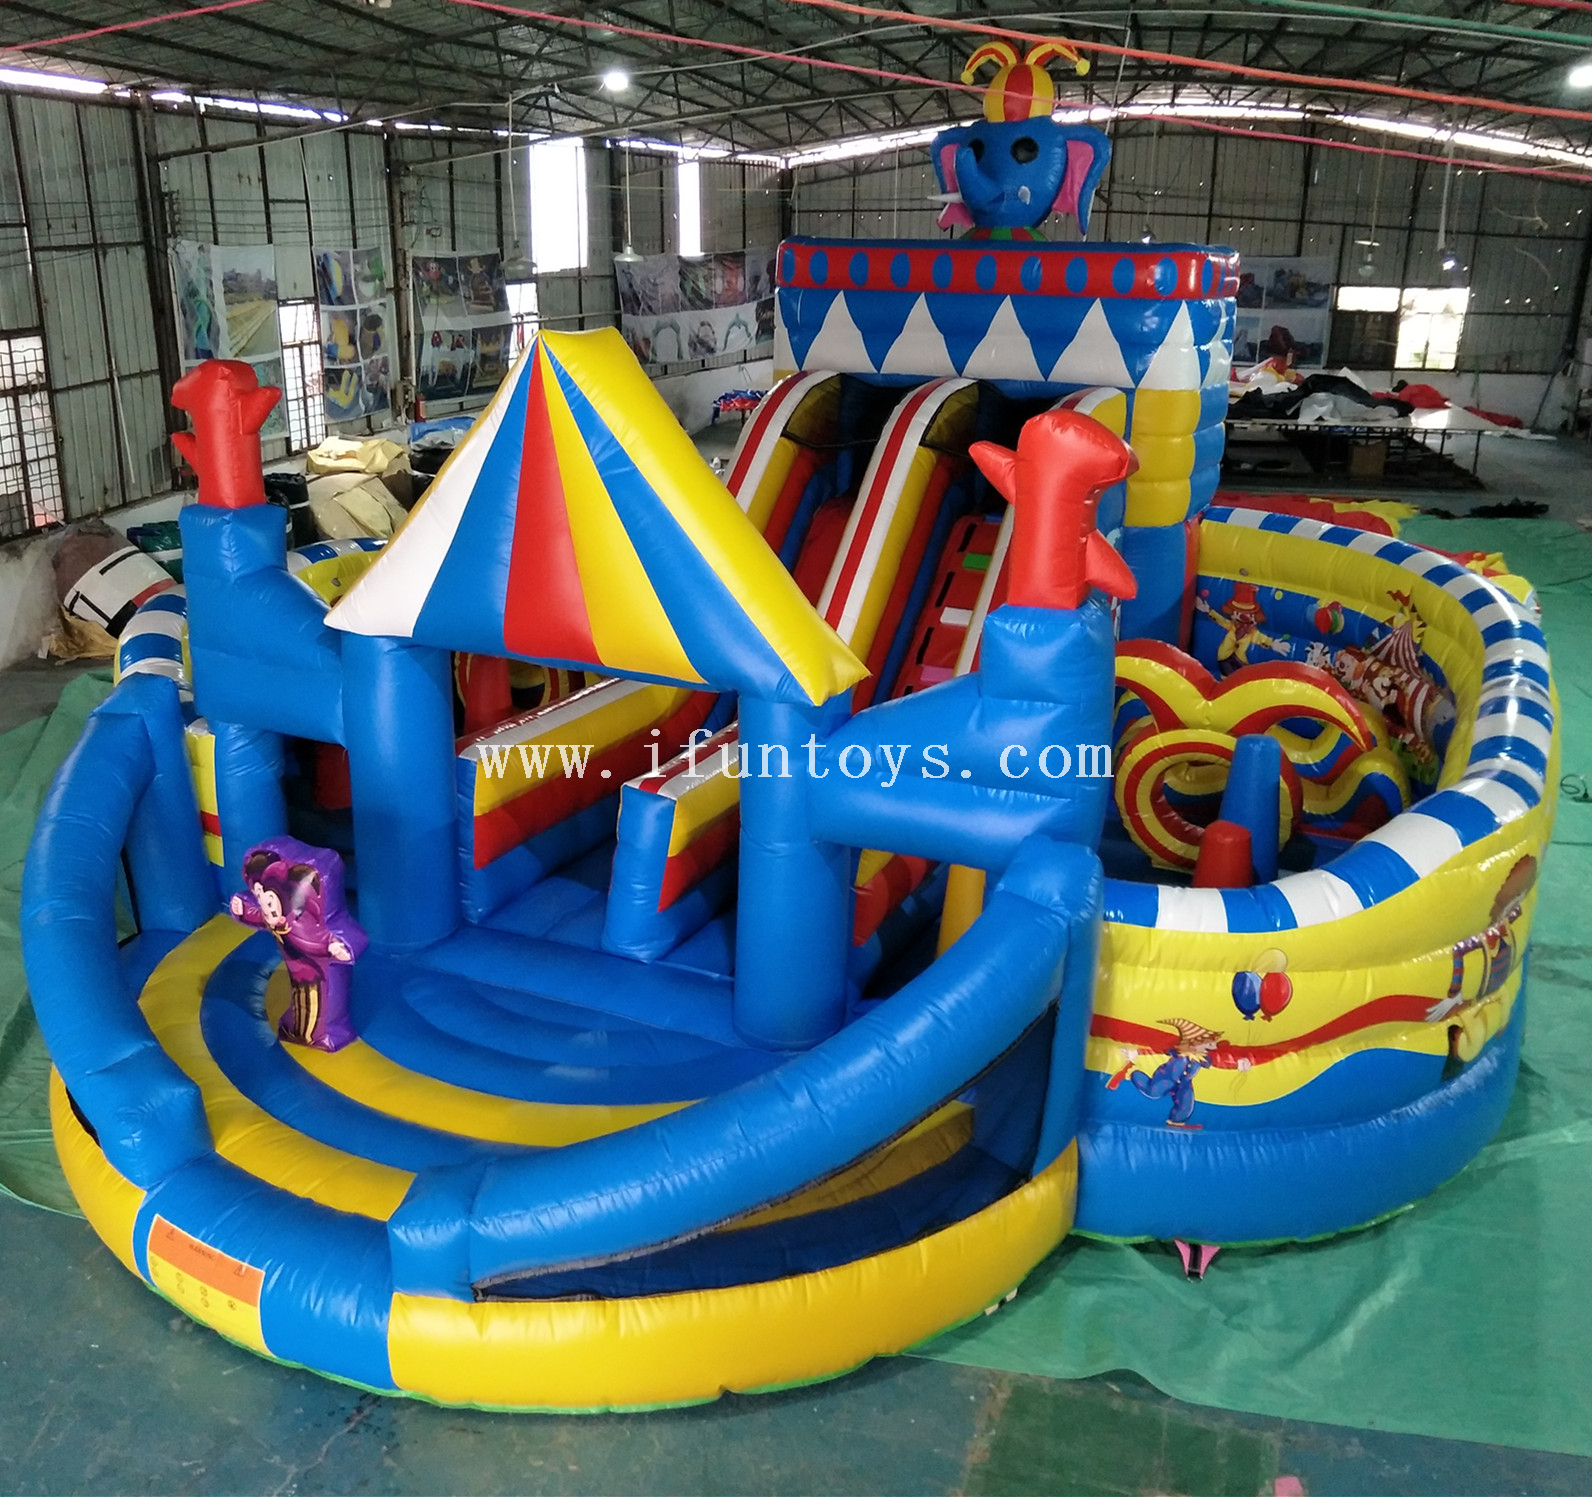 Commercial inflatable animal theme amusement park /inflatable Circus world playground/ big party fun city for kids